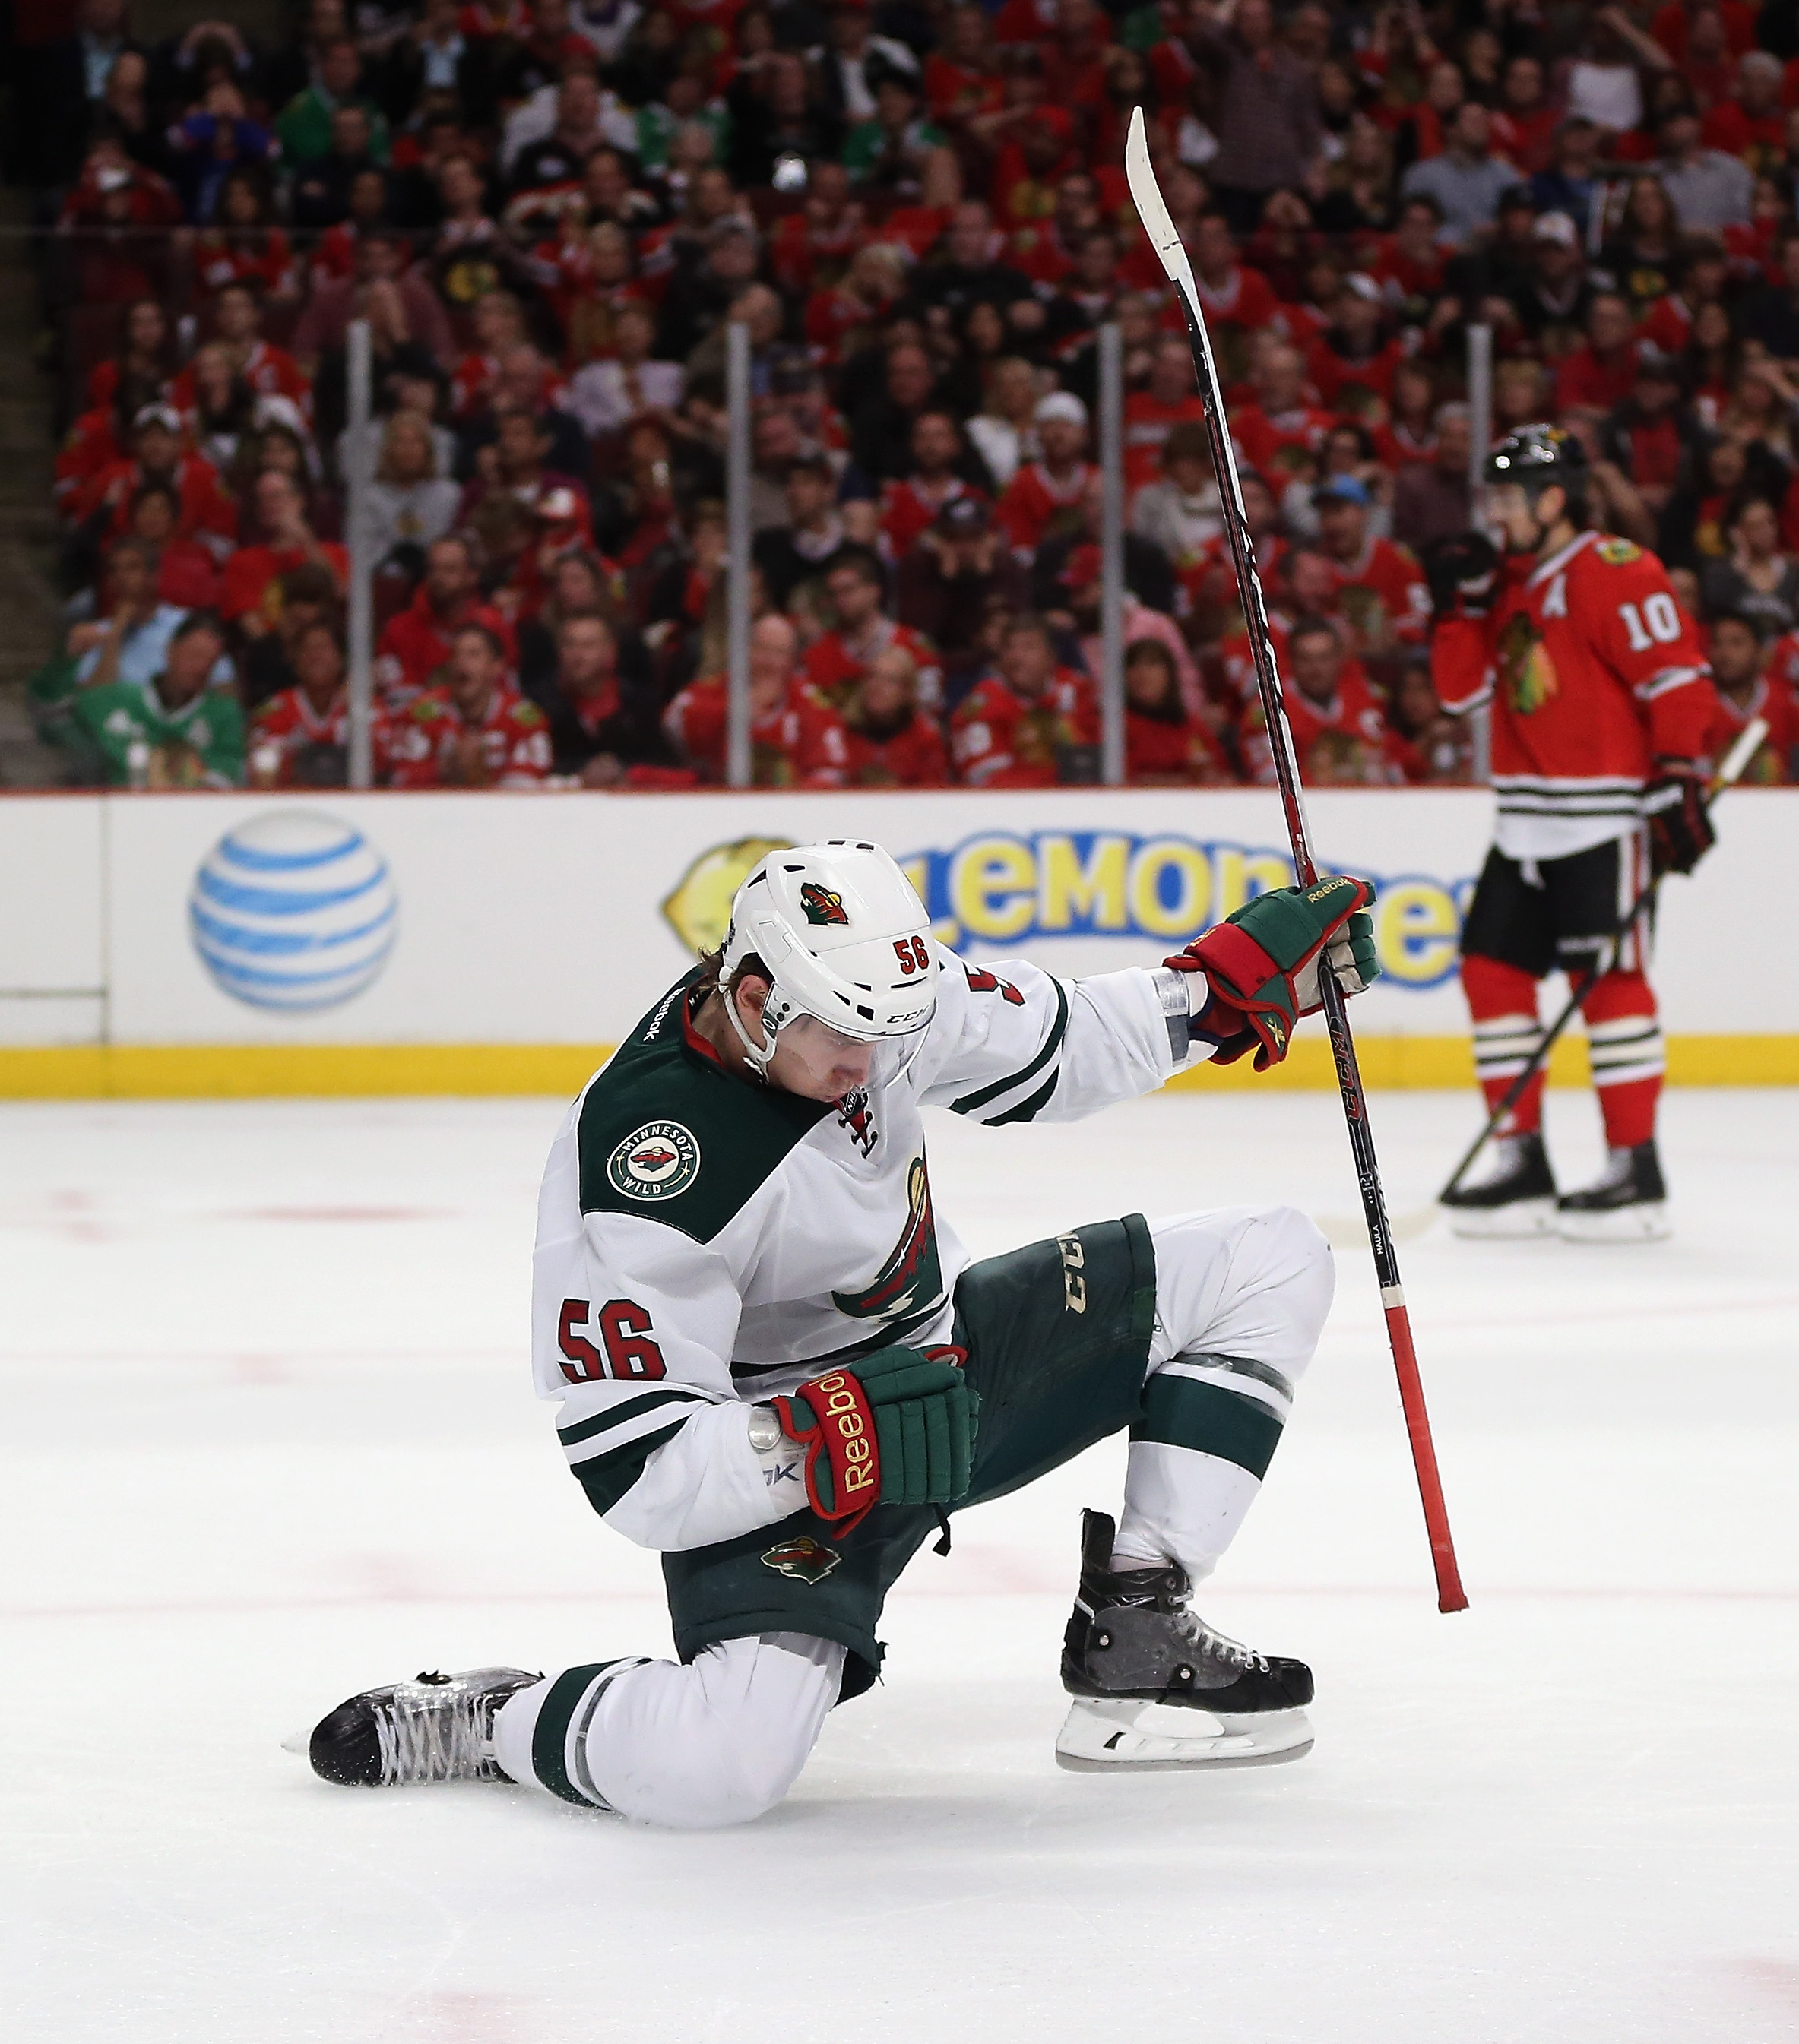 Rookie Erik Haula, 23, a first-year pro, has given the Minnesota Wild a push in the postseason. Photo by Jonathan Daniel/Getty Images.